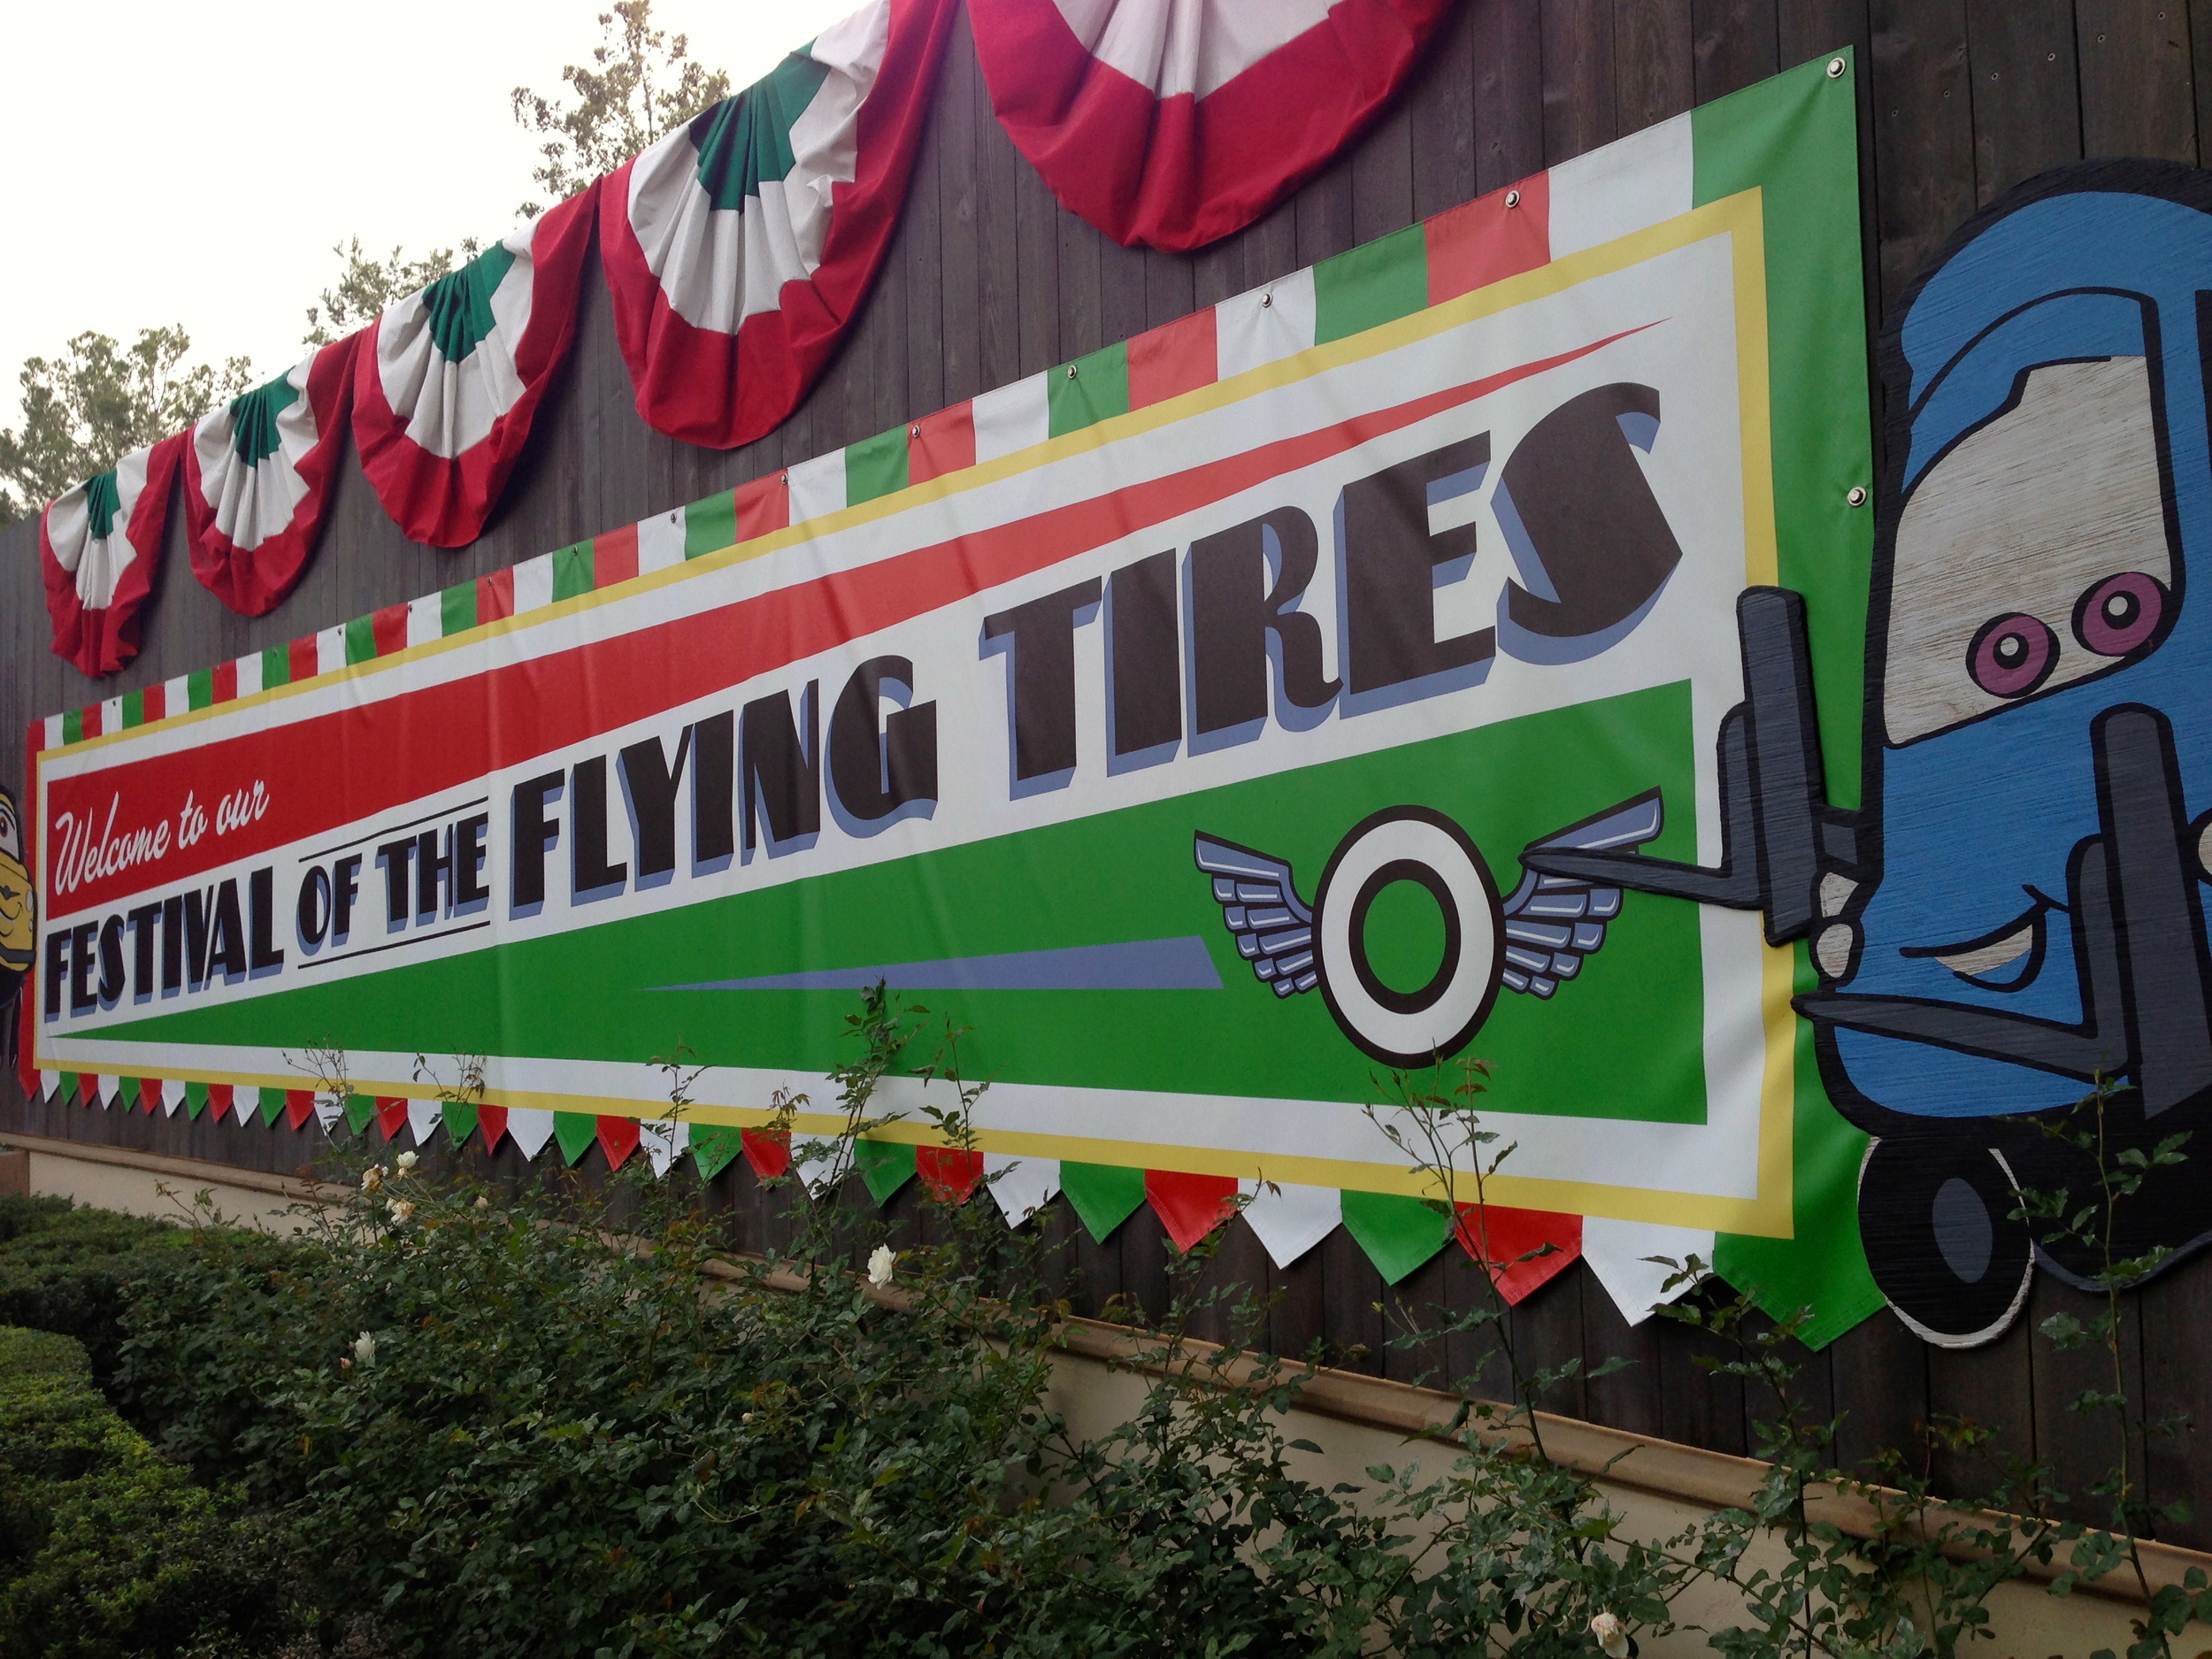  The Festival of the Flying Tires! 